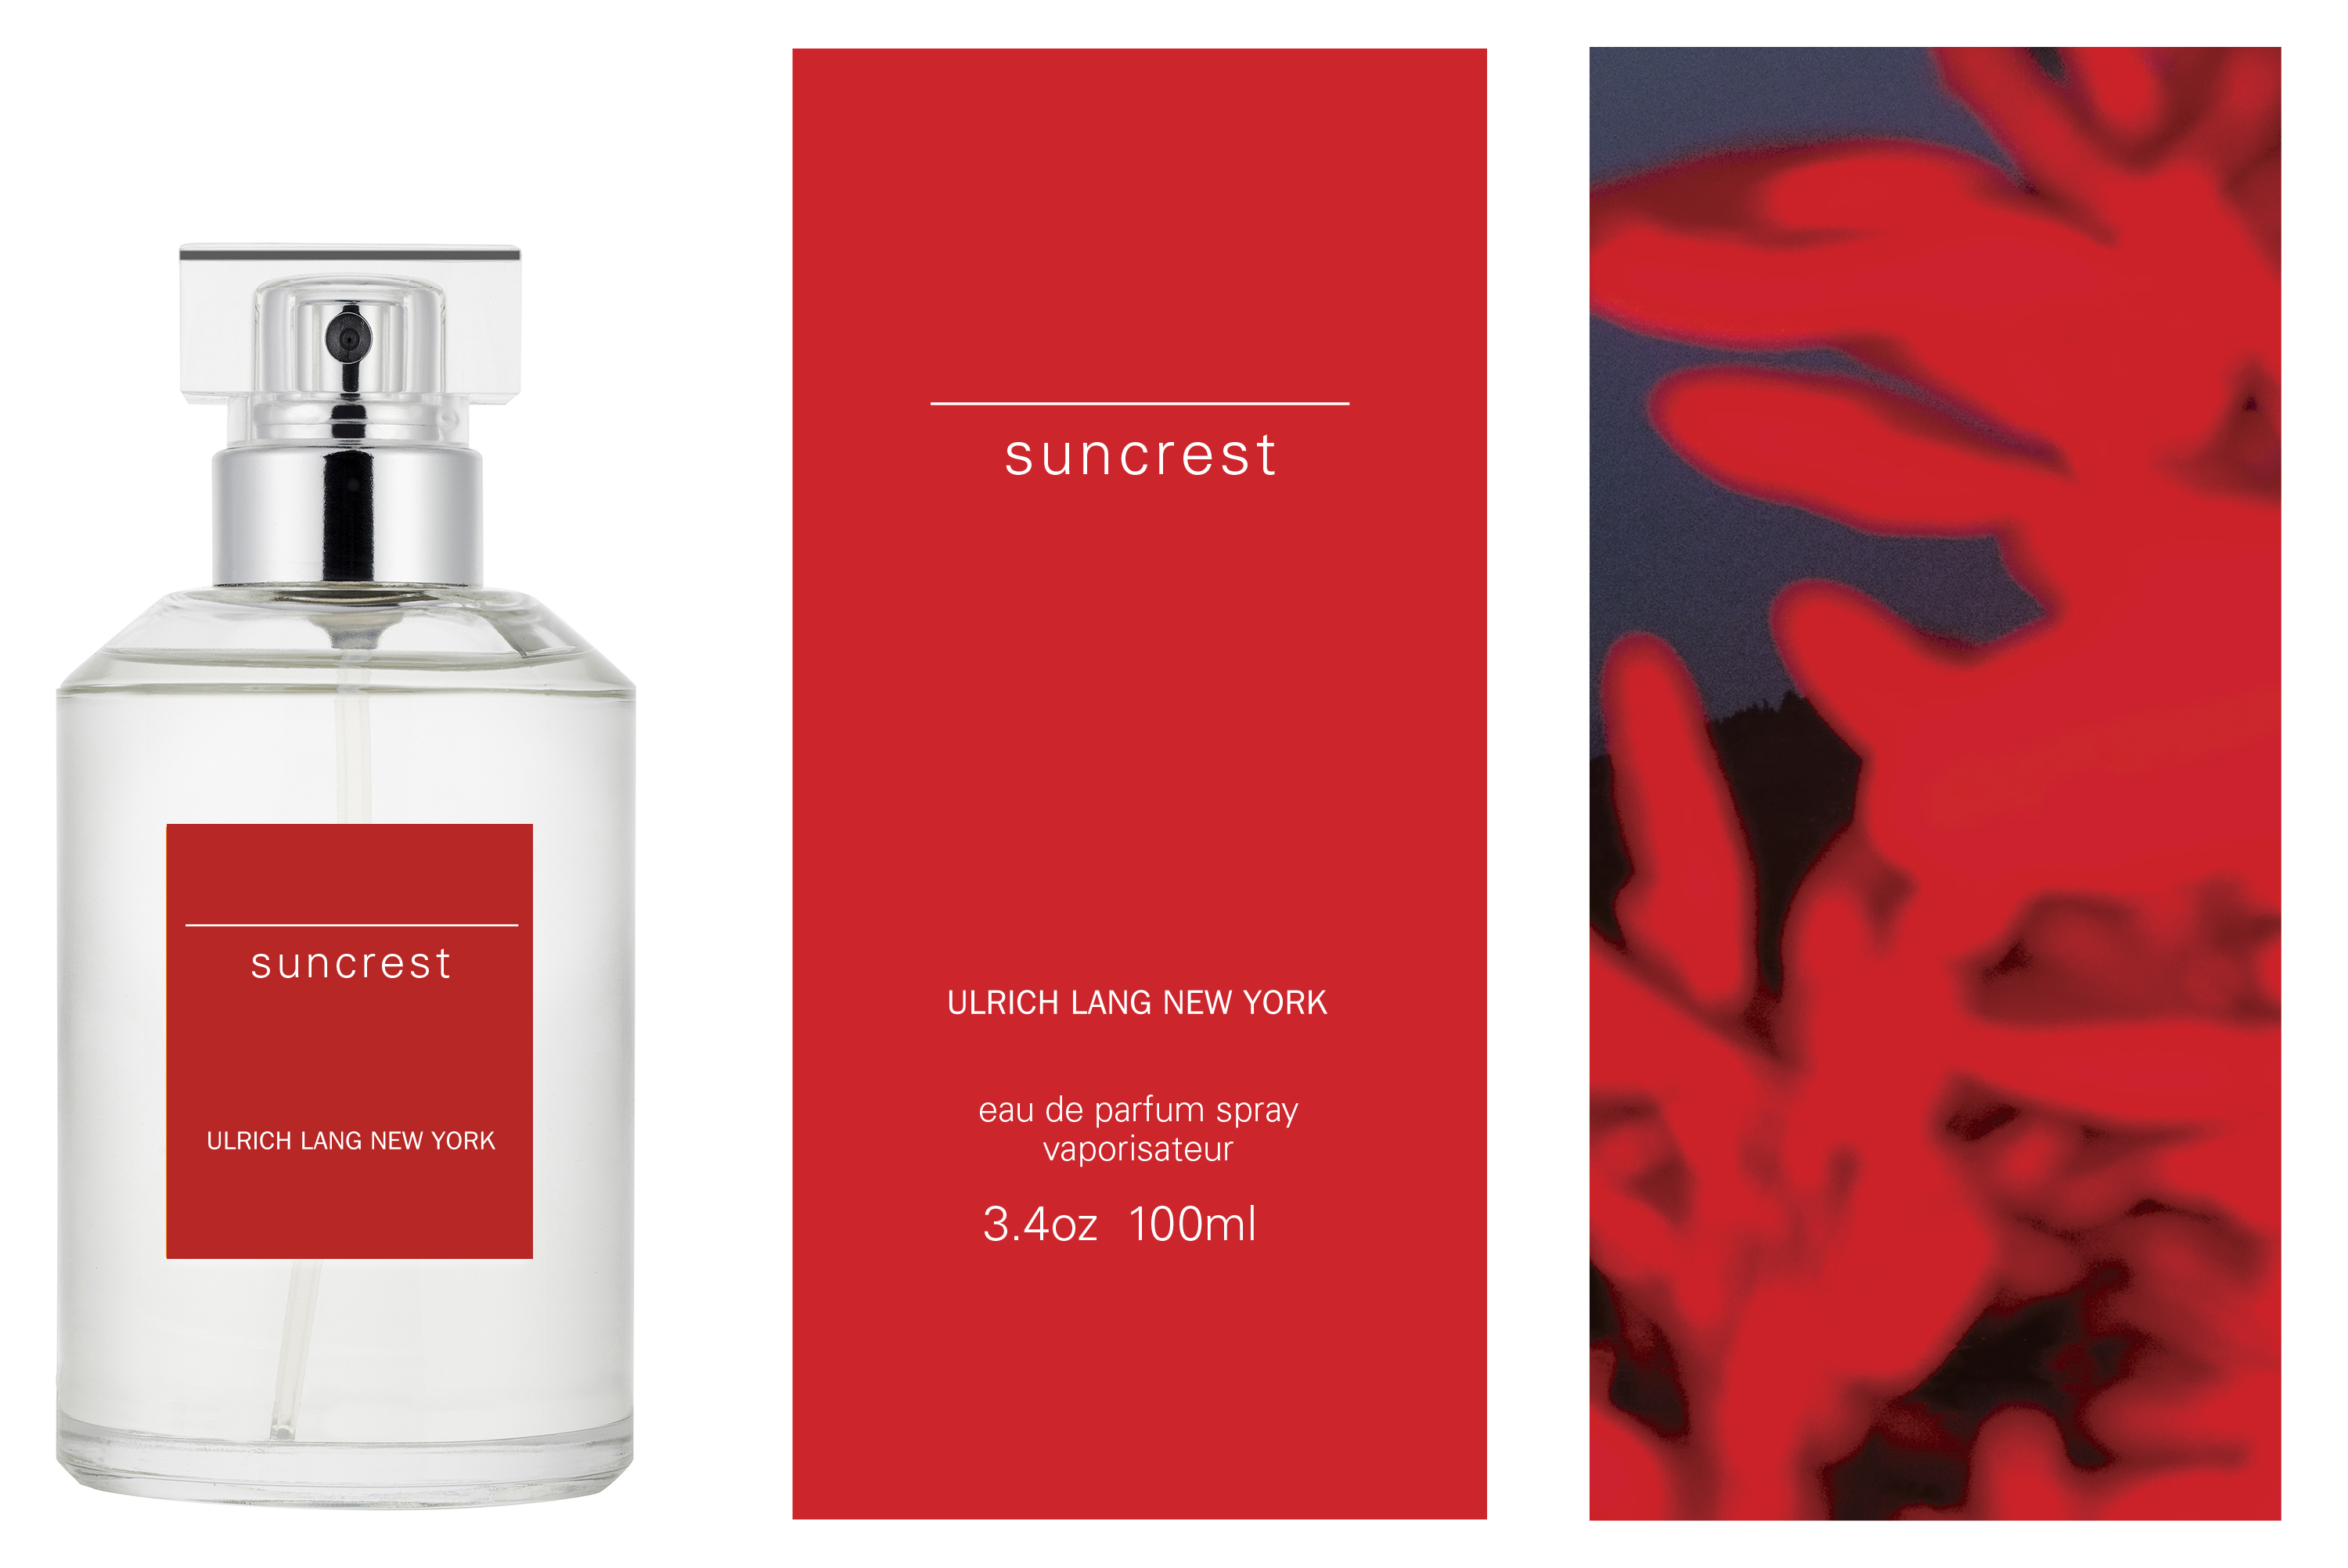 Ulrich Lang New York SUNCREST – A Symphony of Optimism and Eternal